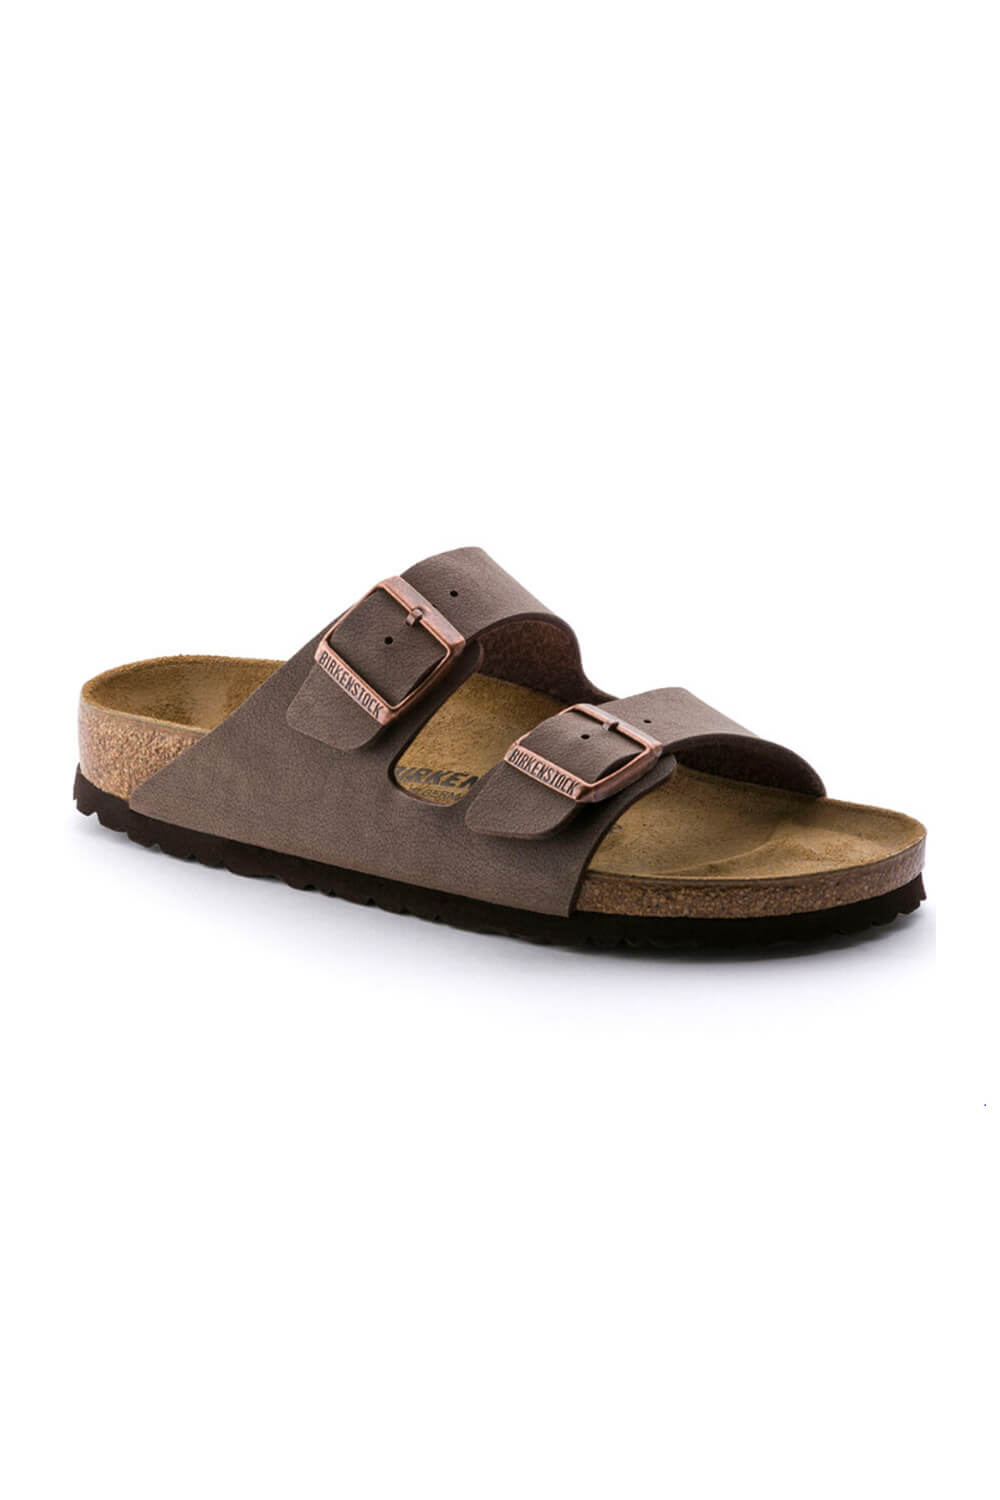 SHOEBACCA.COM on X: But first, coffeeand your Birkenstock